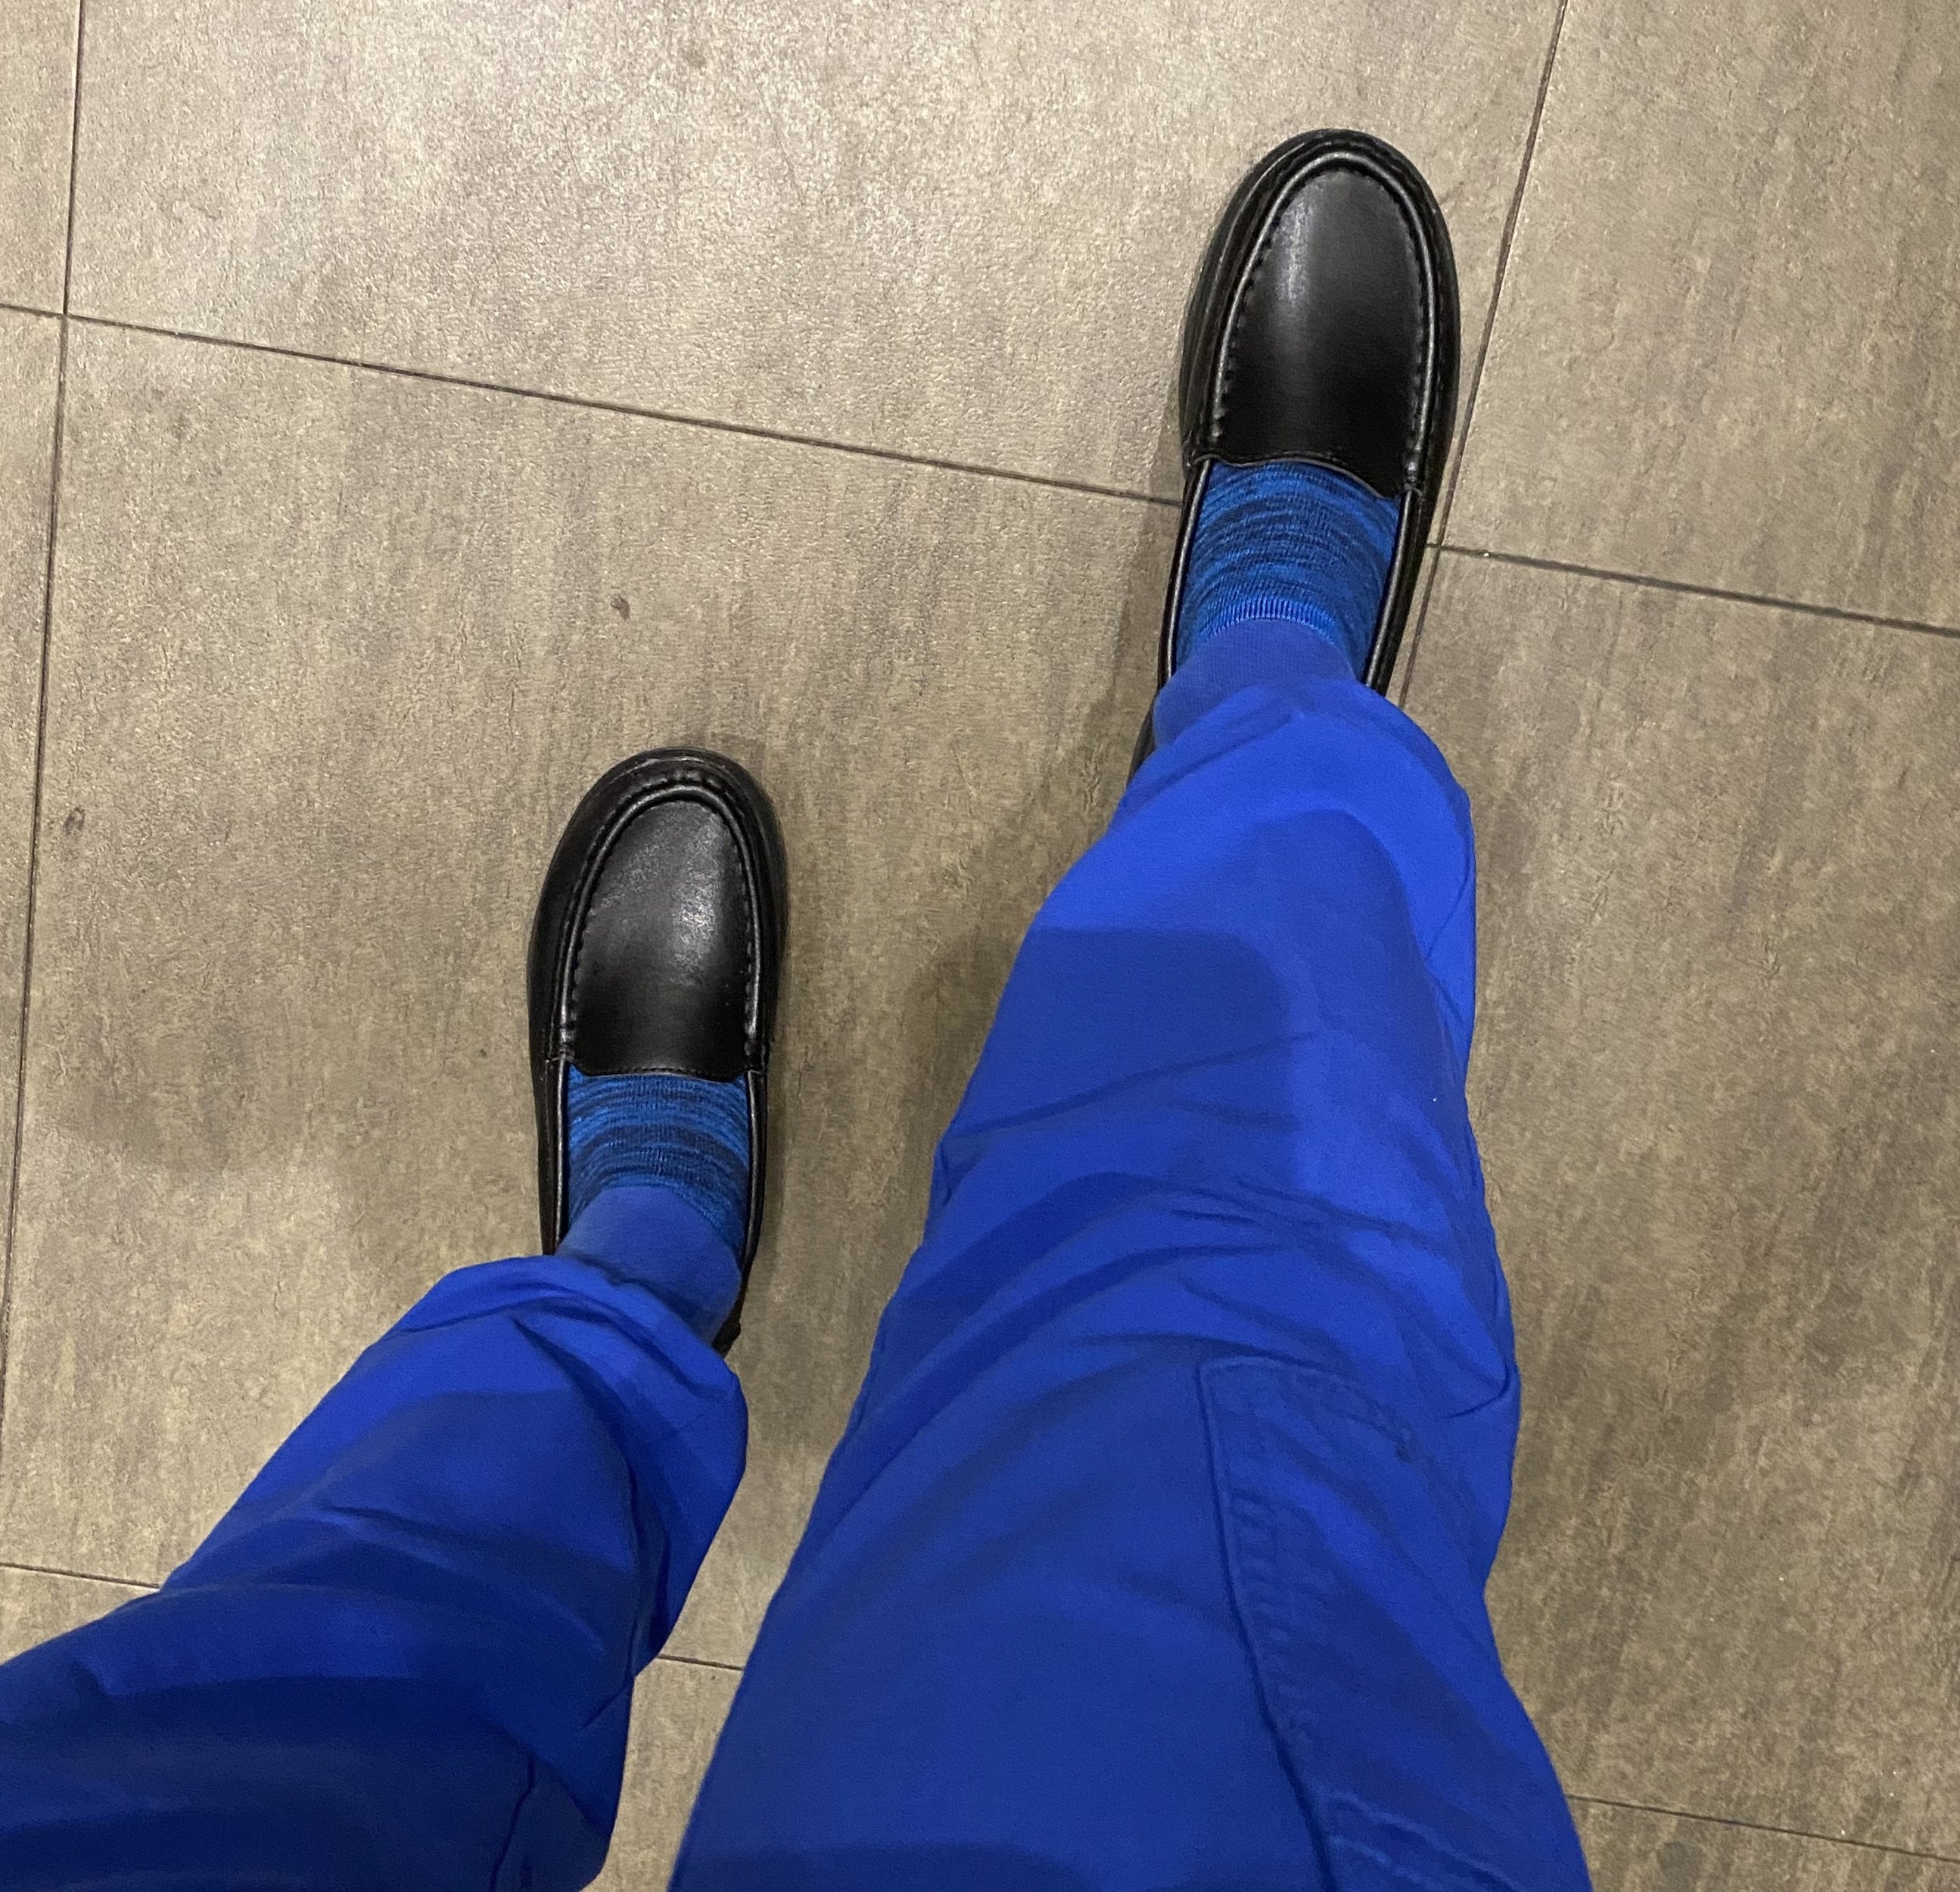 Reviewer wearing the black loafers with blue socks and scrubs